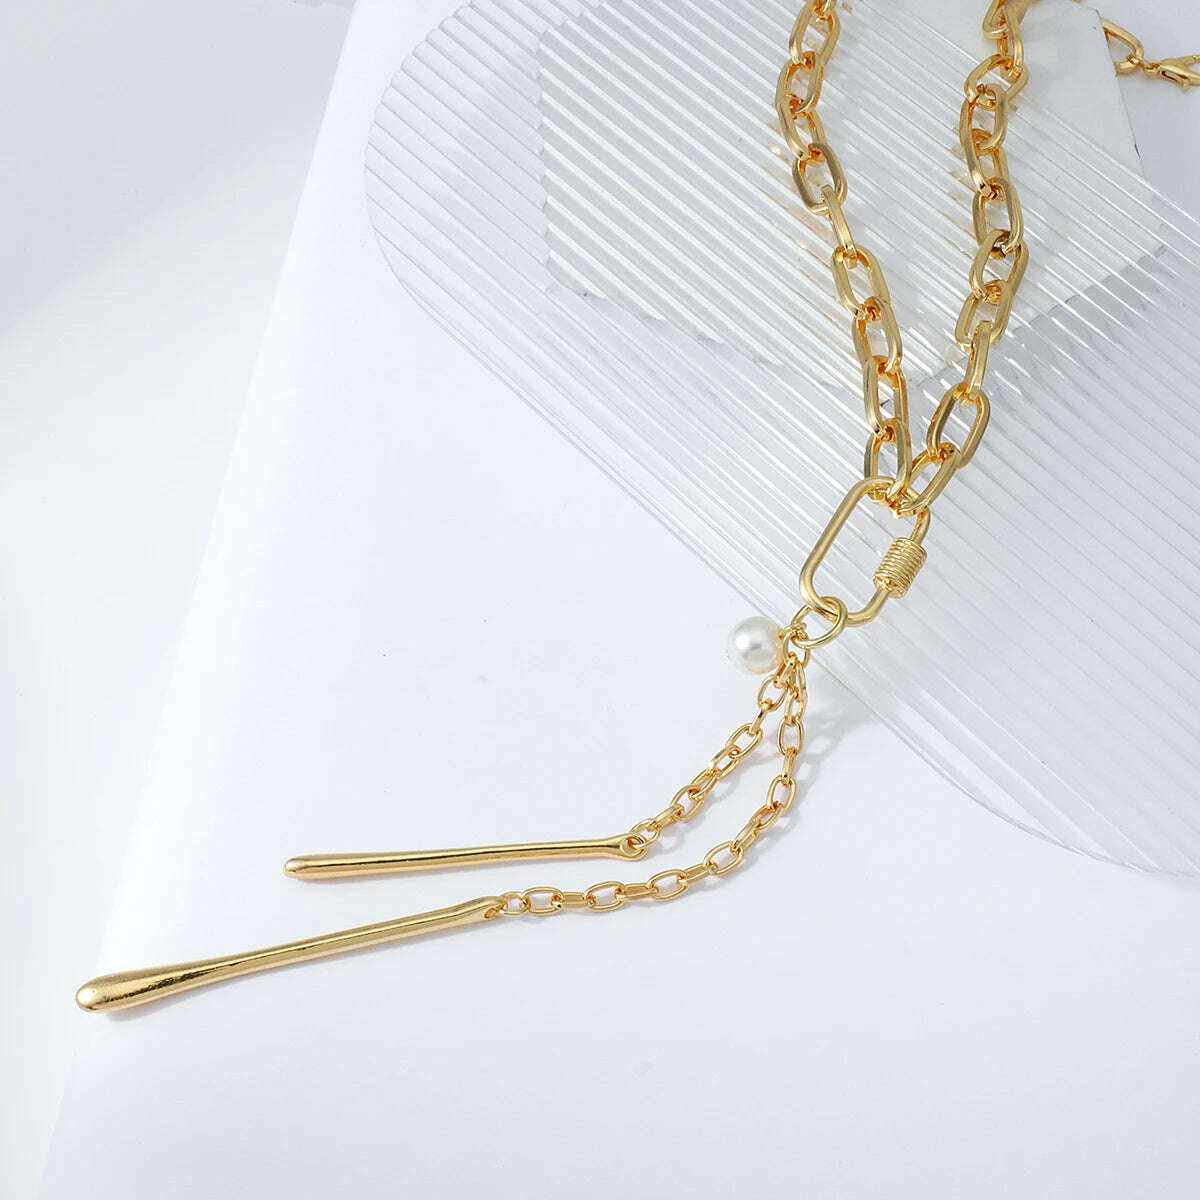 KIMLUD, Flashbuy Gold Color Chain Necklace for Women New Design Pearl Metal Long Chain Geometric Pendant Necklace Statement Jewelry, KIMLUD Women's Clothes